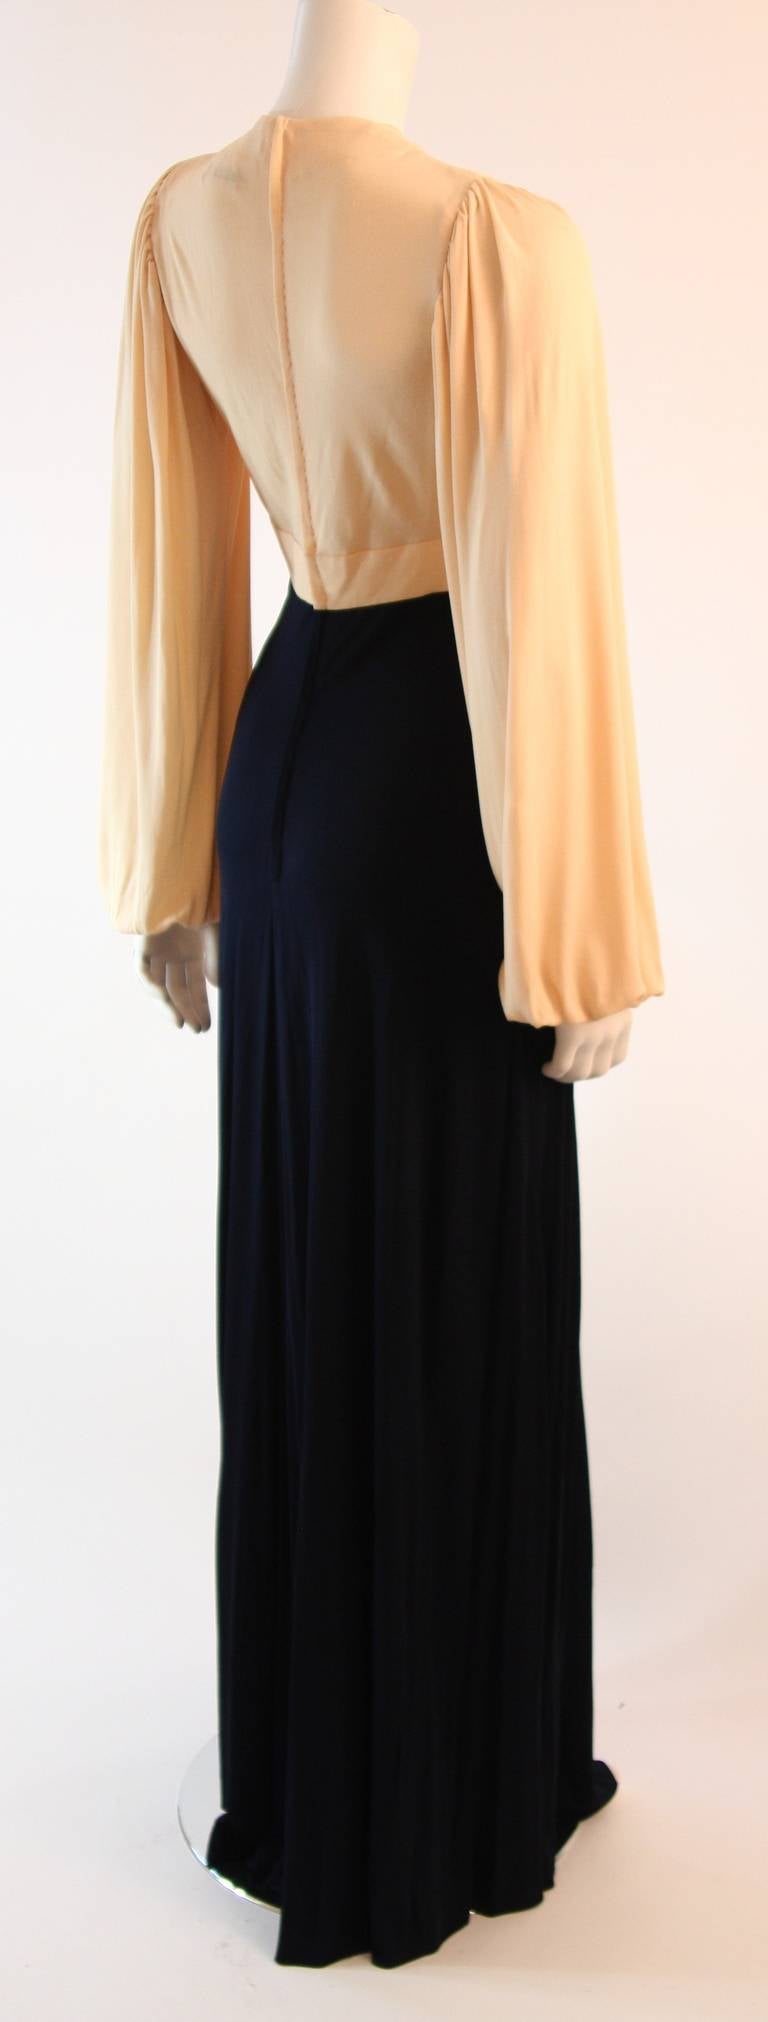 Women's Gorgeous Vicky Tiel Bell Sleeve Cream and Navy Full Length Gown